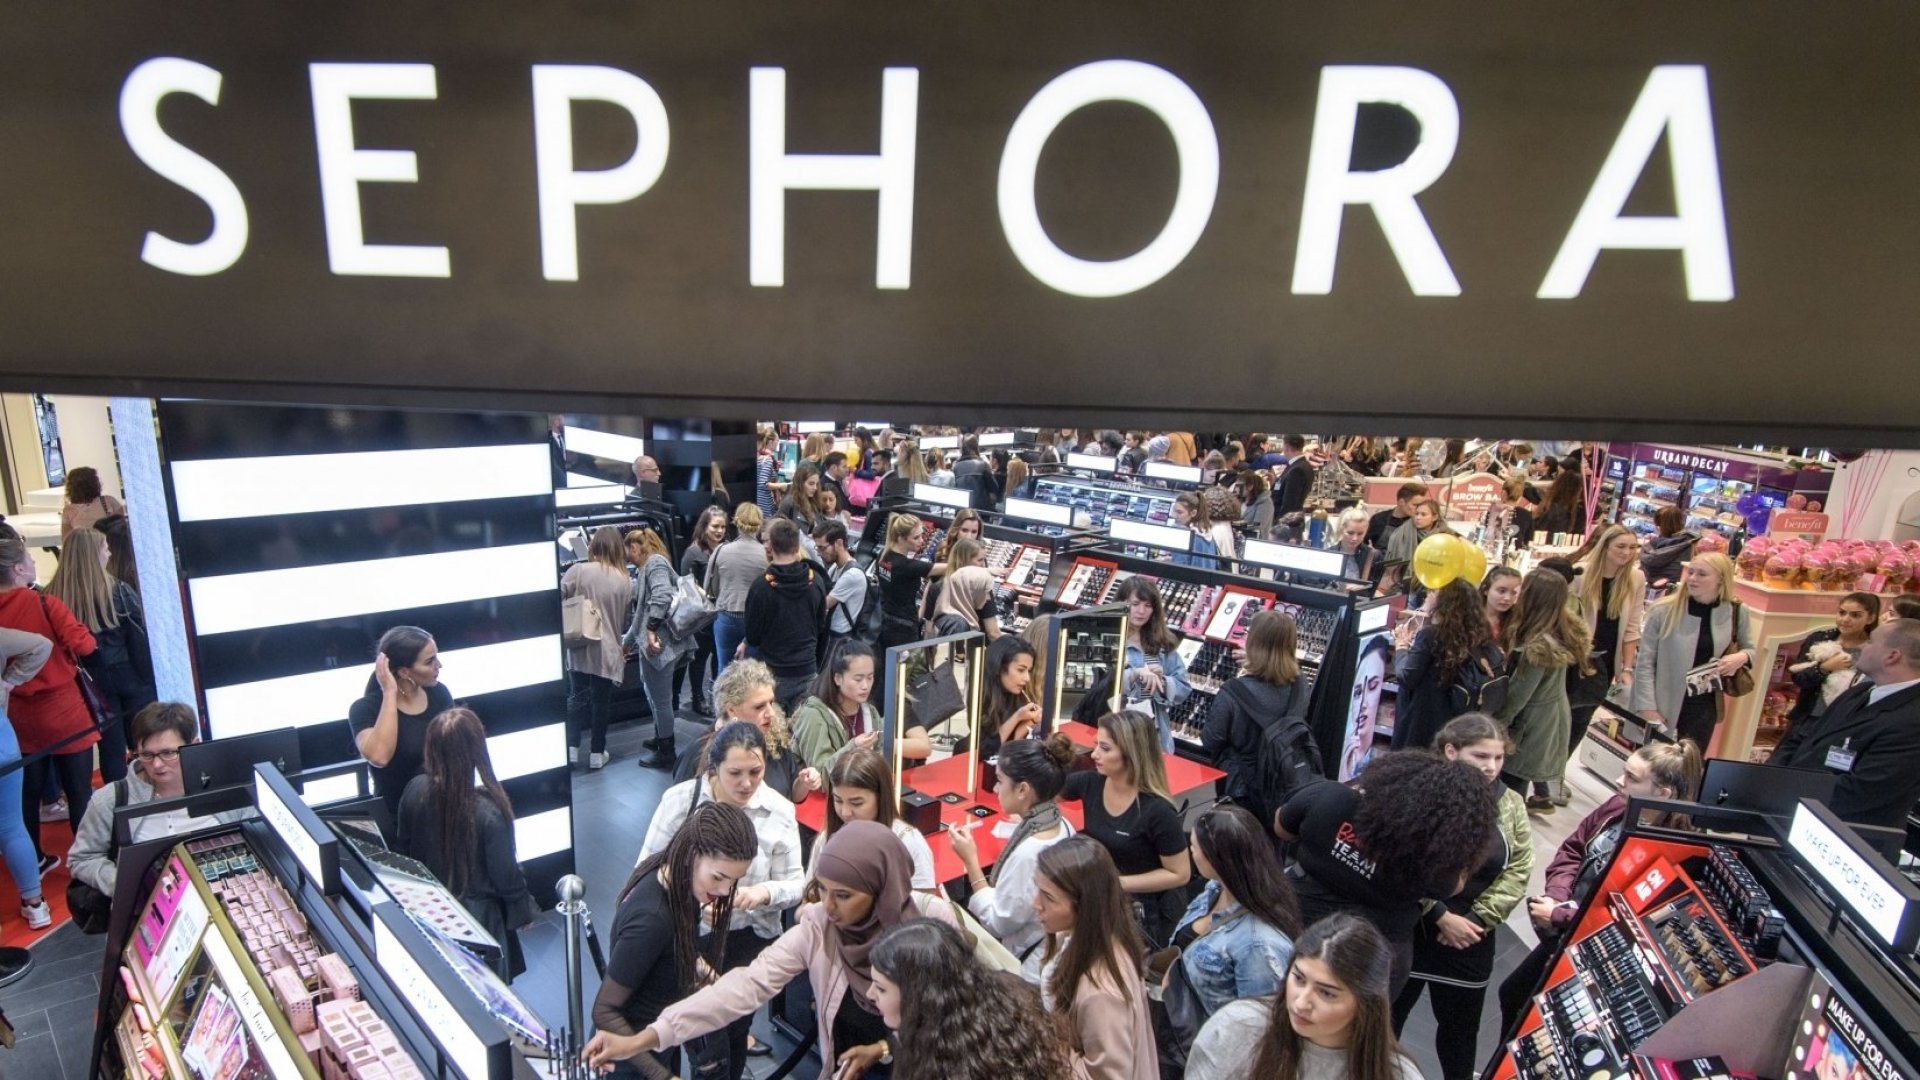 Sephora's New Work Policy Cuts Hours and Free Makeup, Leaving Staff Unhappy and Less Rewarded